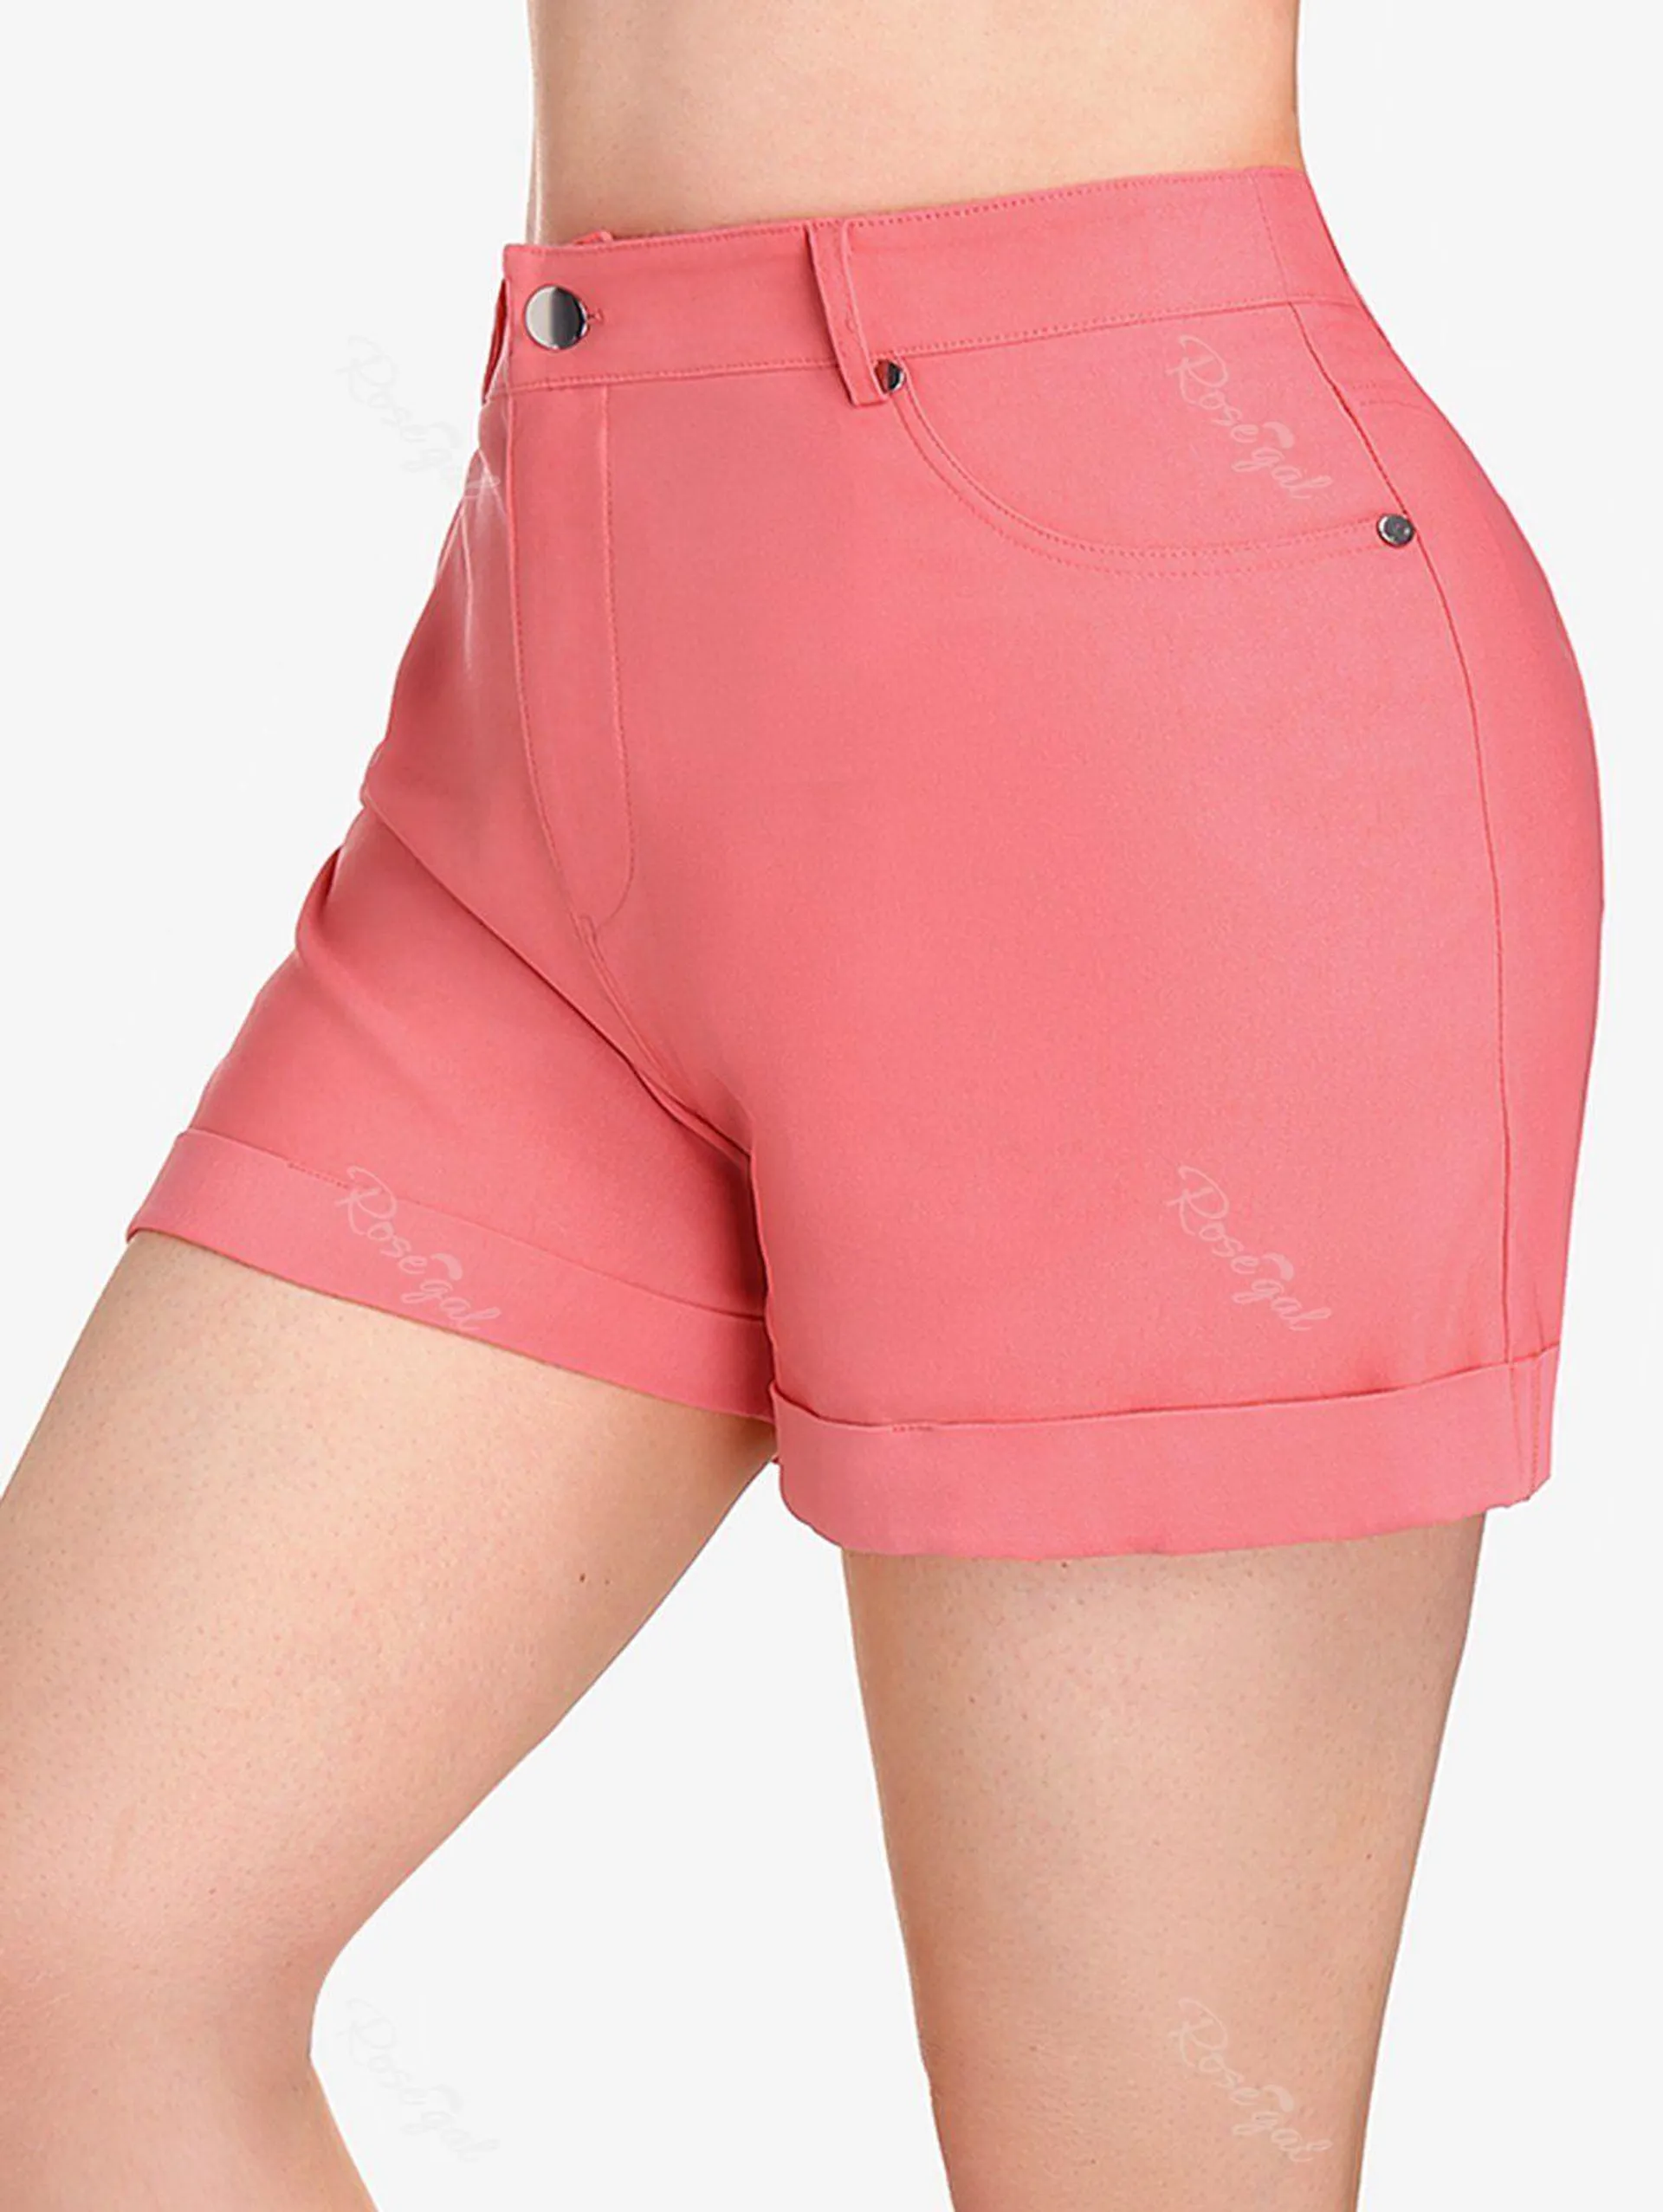 Plus Size Cuffed Colored Shorts with Pockets - 4x | Us 26-28